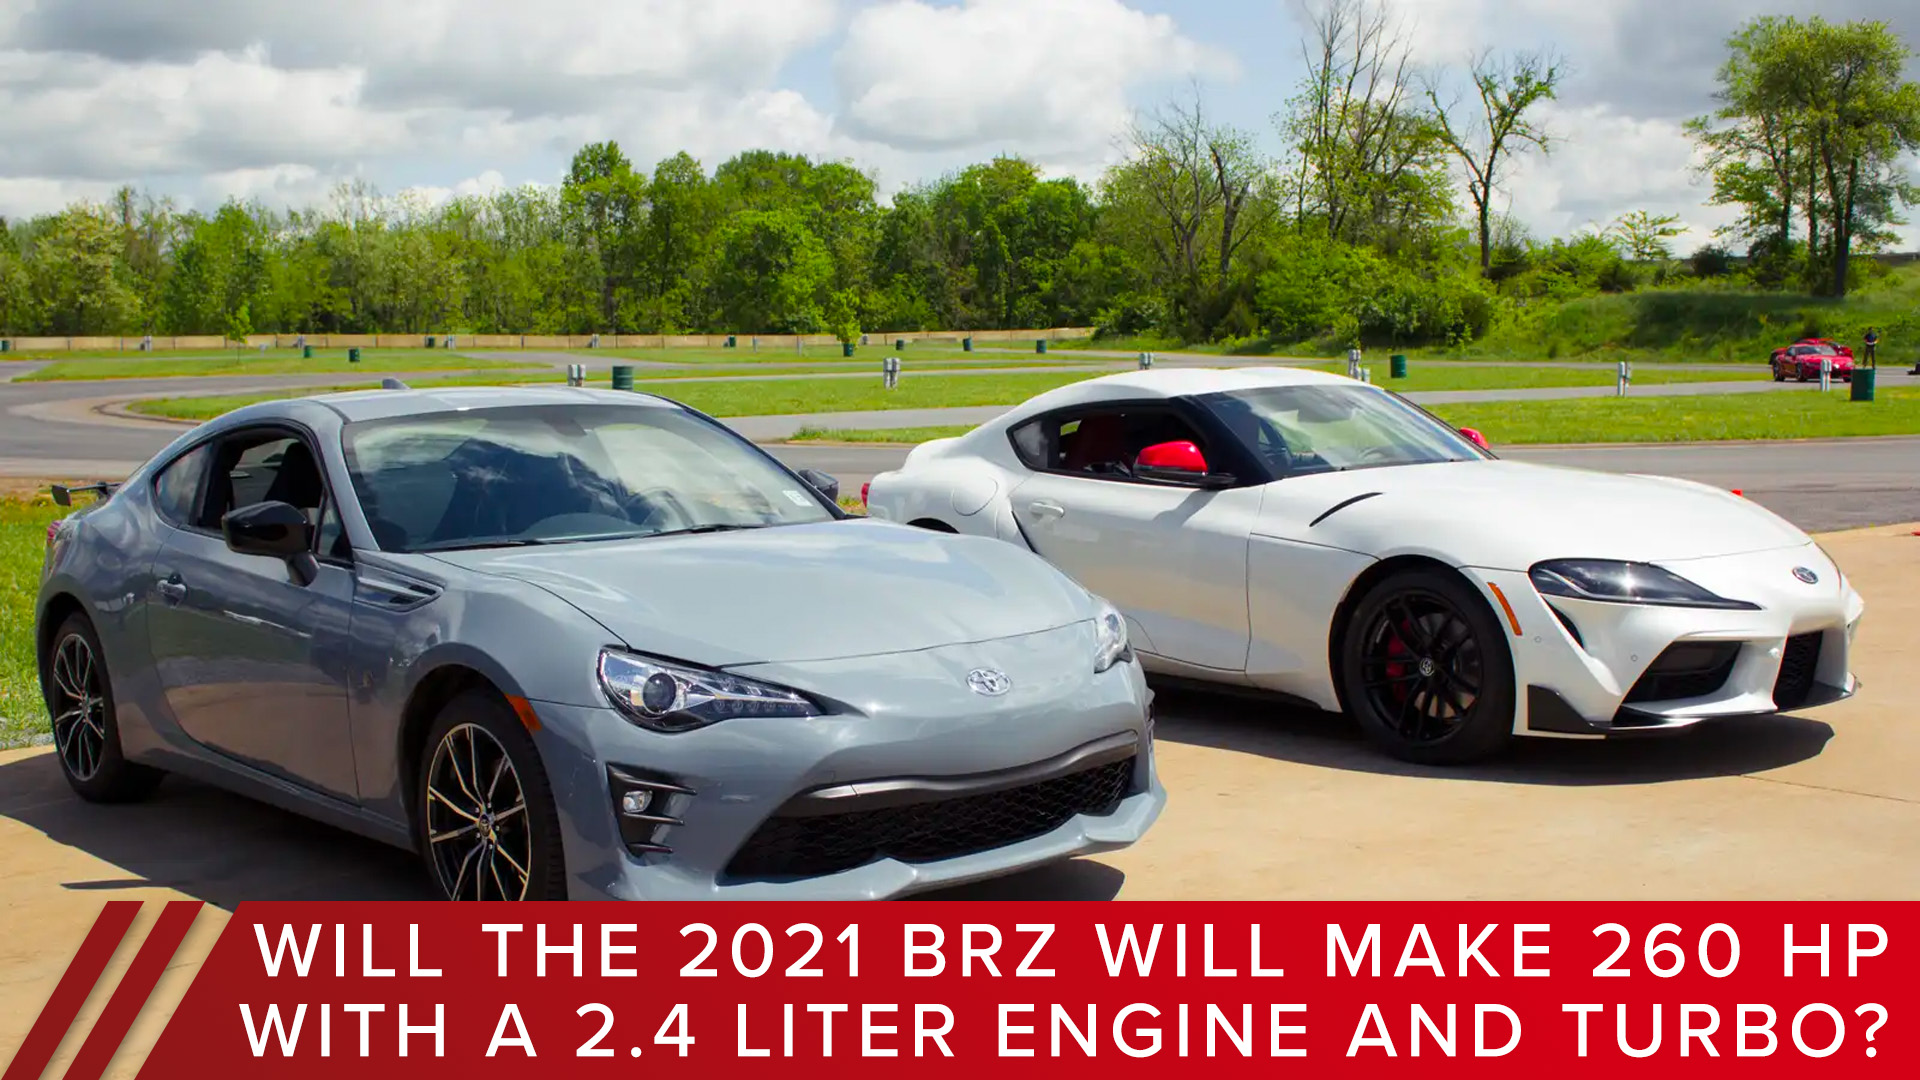 The 2021 BRZ will make 260 hp with a 2.4 Liter Engine and a Turbo?